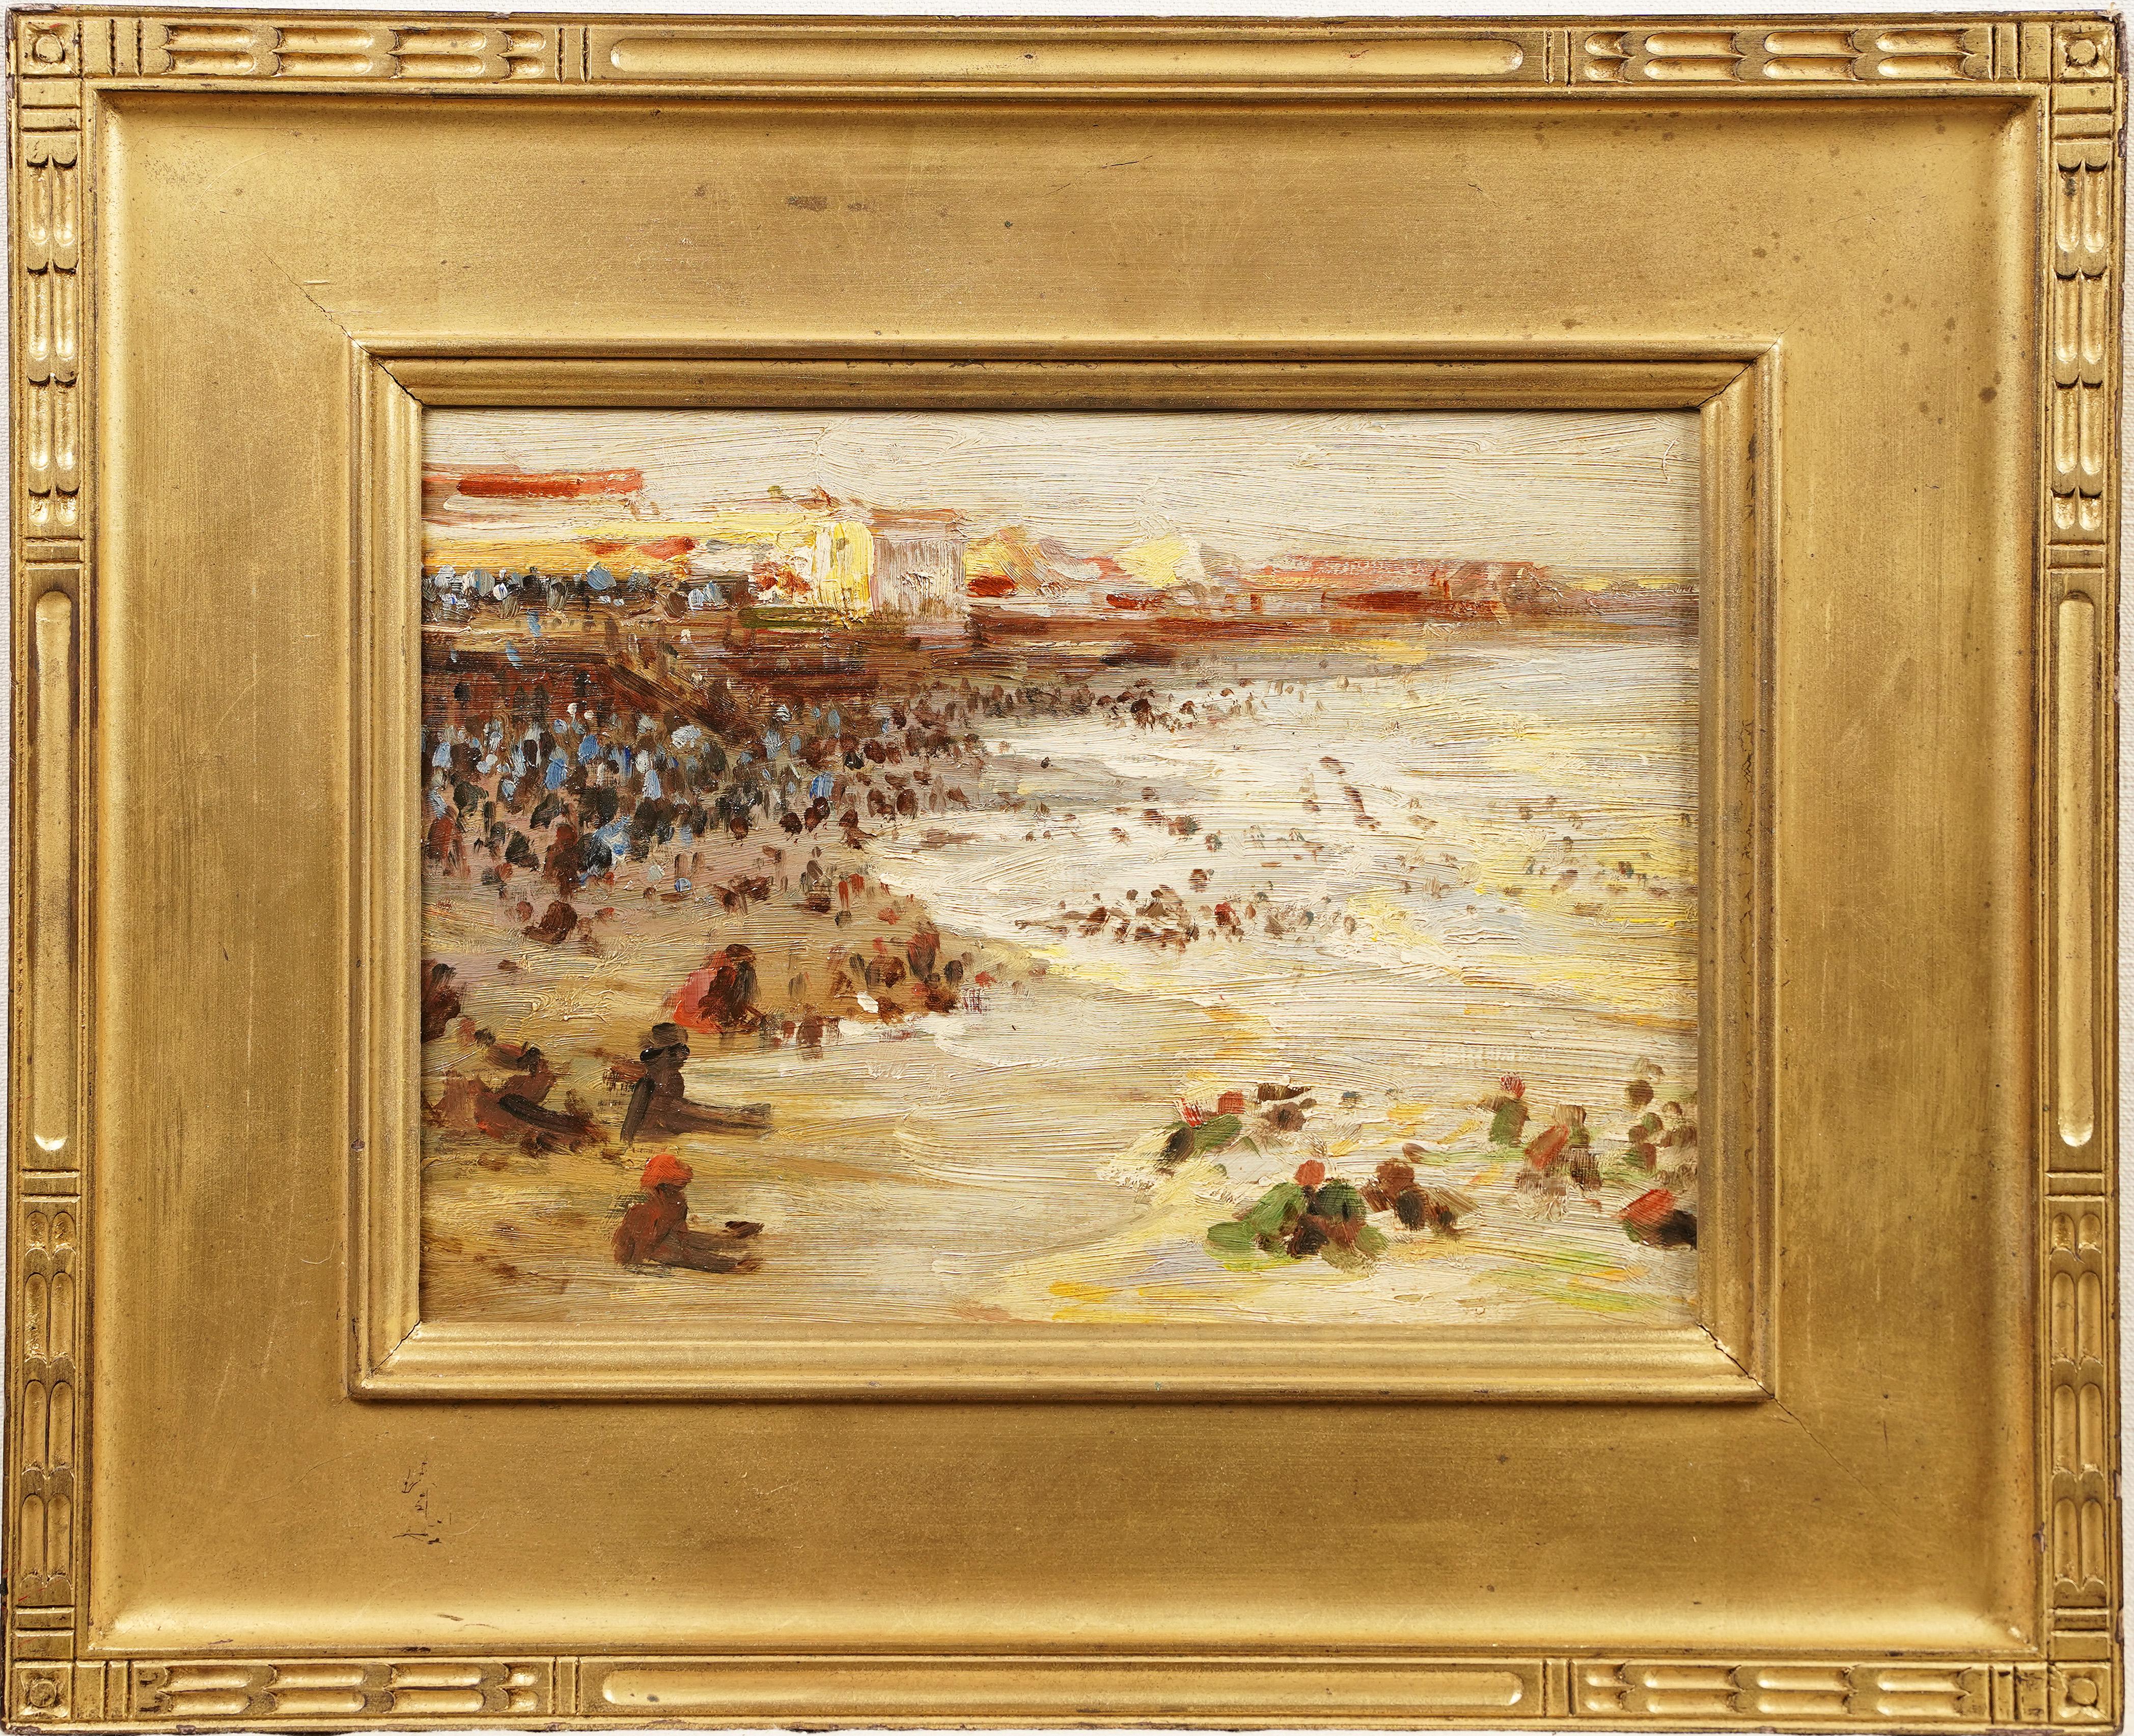  Rare Antique American School Bustling New York Beach Scene Framed Oil Painting - Brown Landscape Painting by Unknown